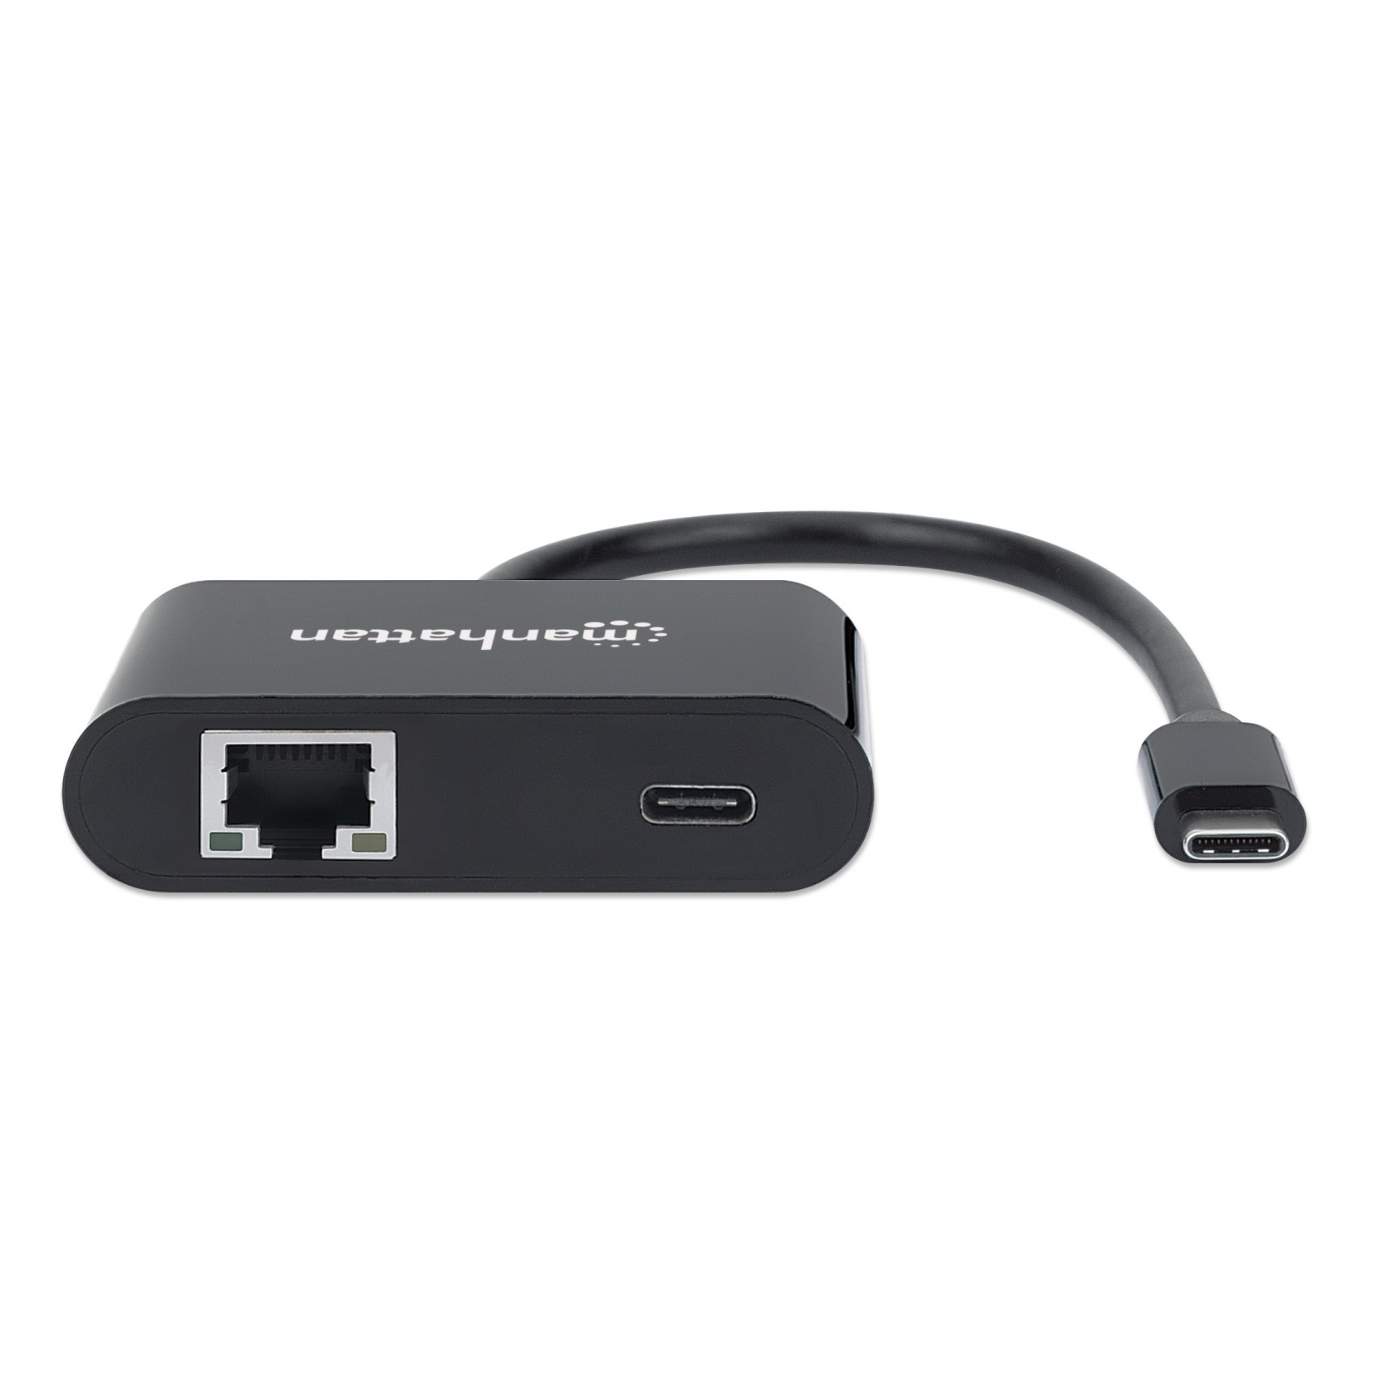 USB-C to Gigabit Network Adapter with Power Delivery Port Image 4